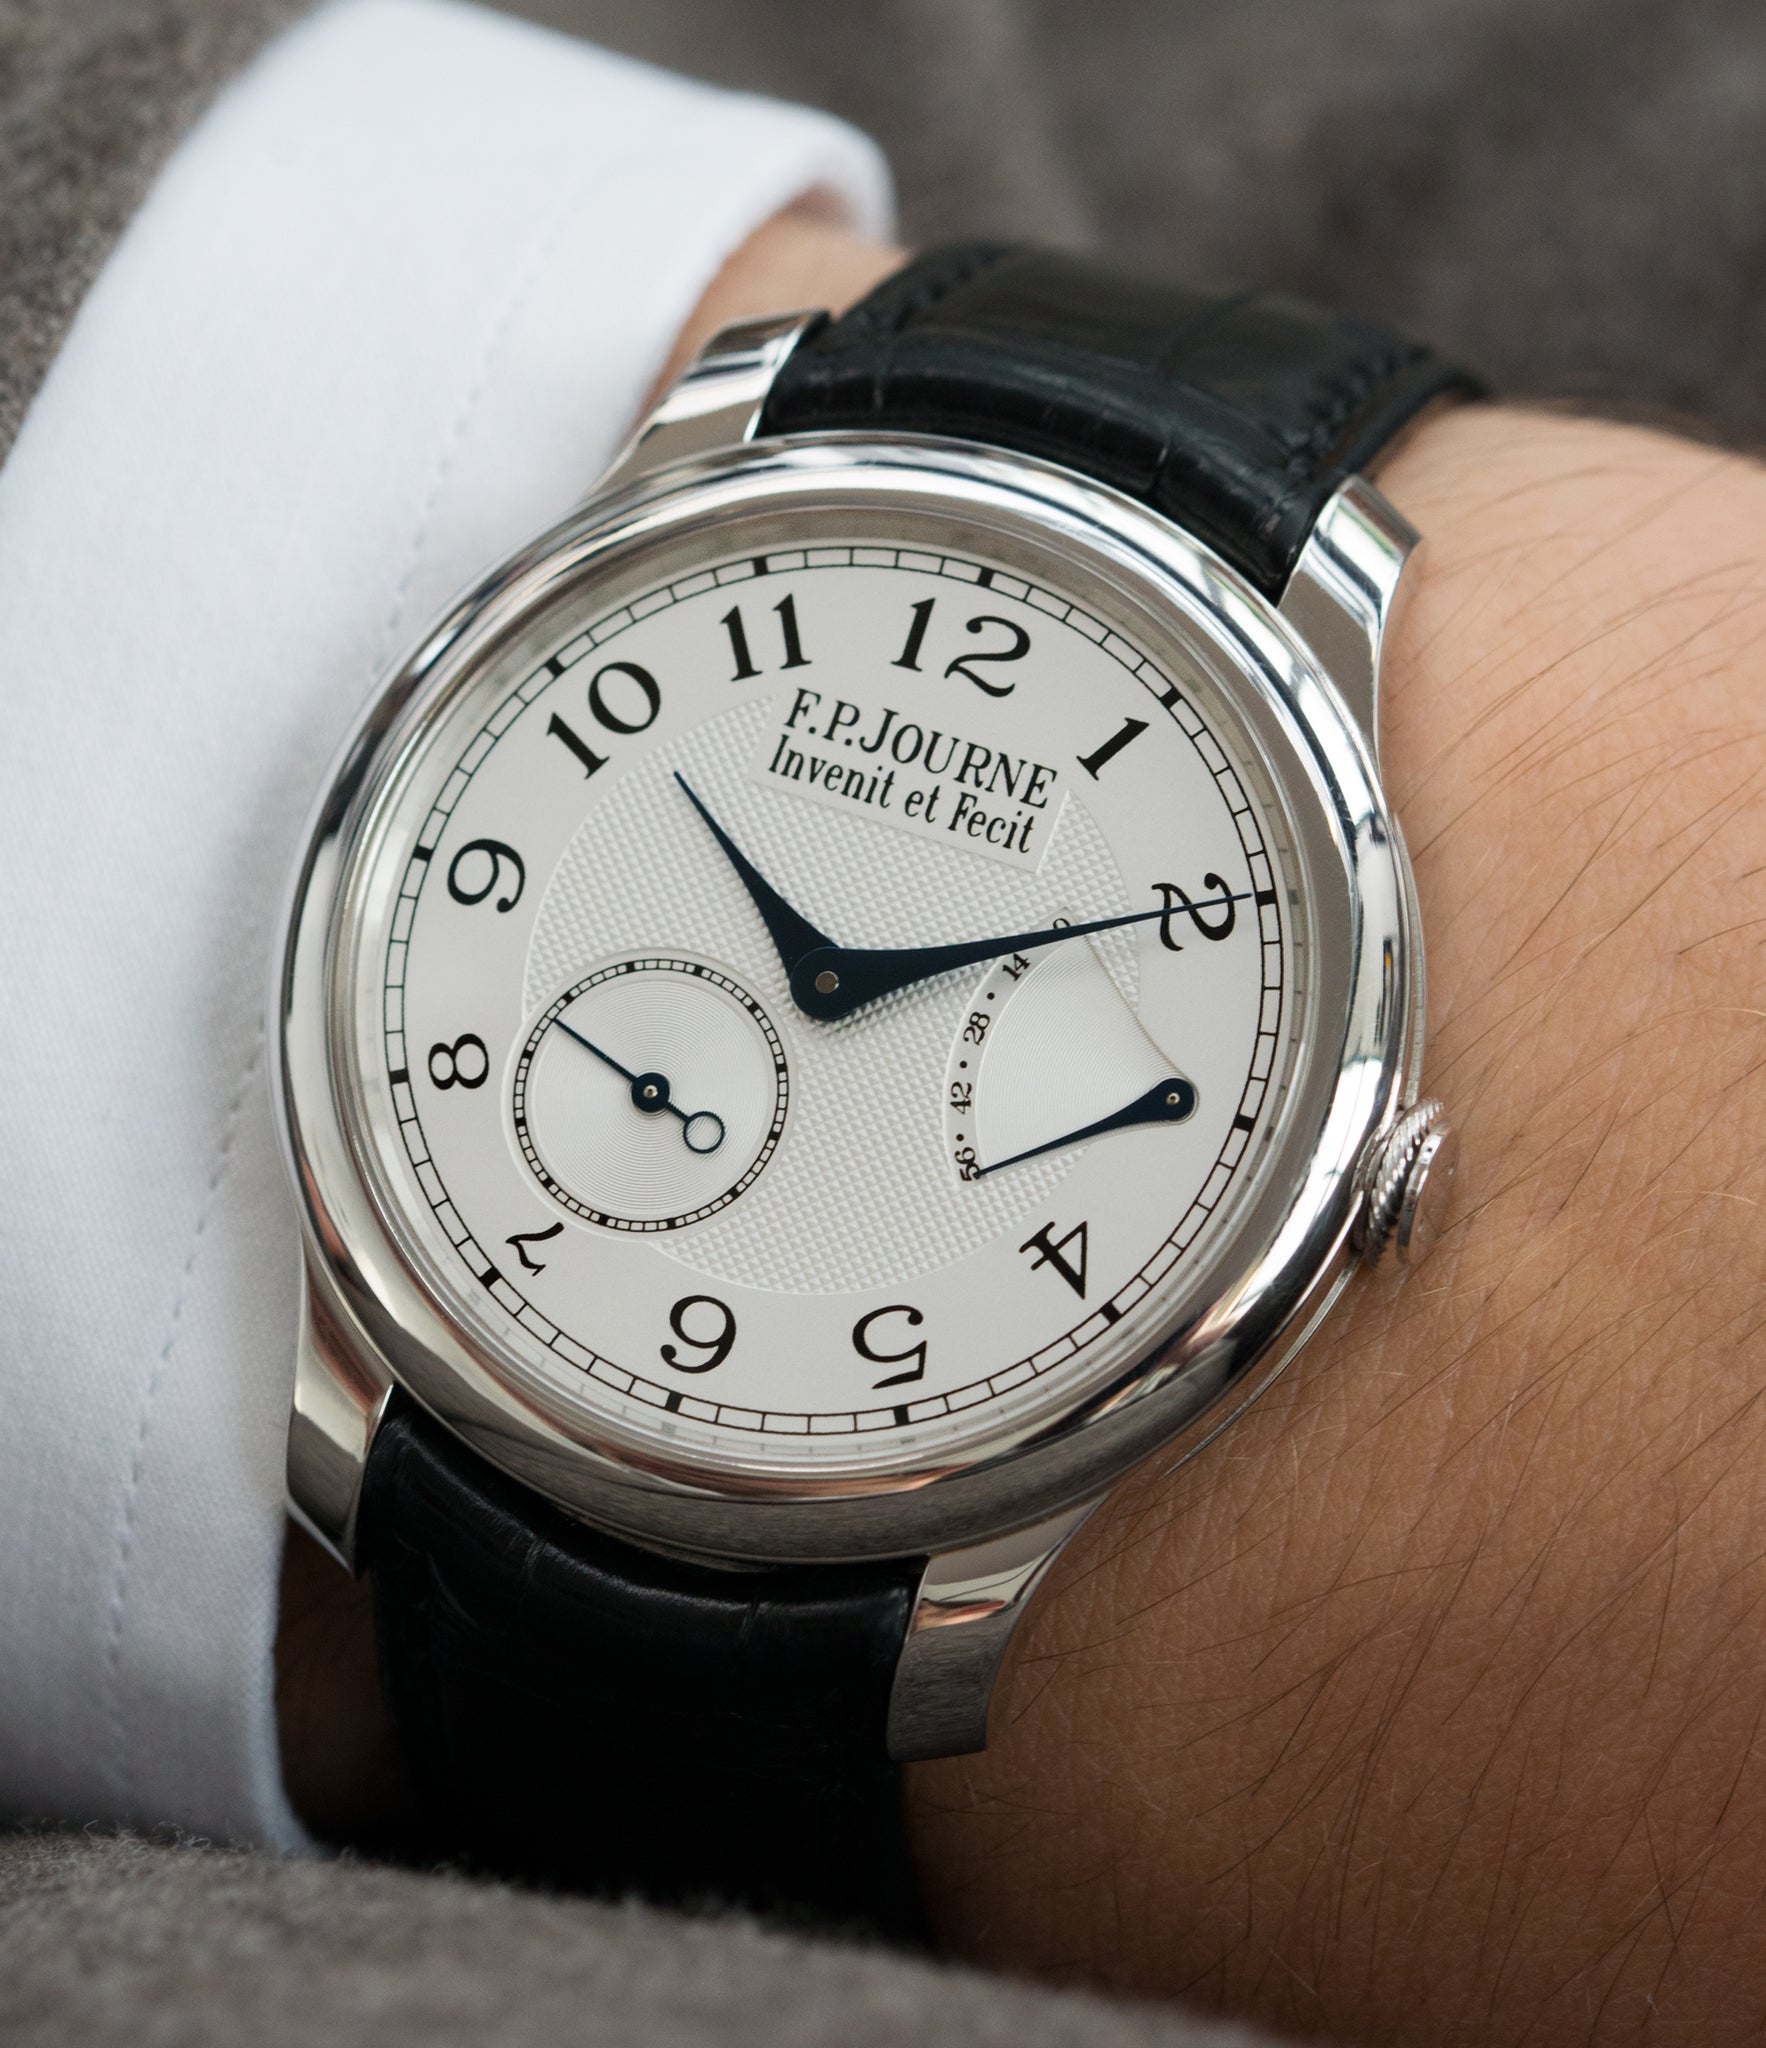 luxury gentlemen wristwatch Chronometre Souverain F. P. Journe platinum watch silver dial online at A Collected Man London specialist retailer of independent watchmakers in UK